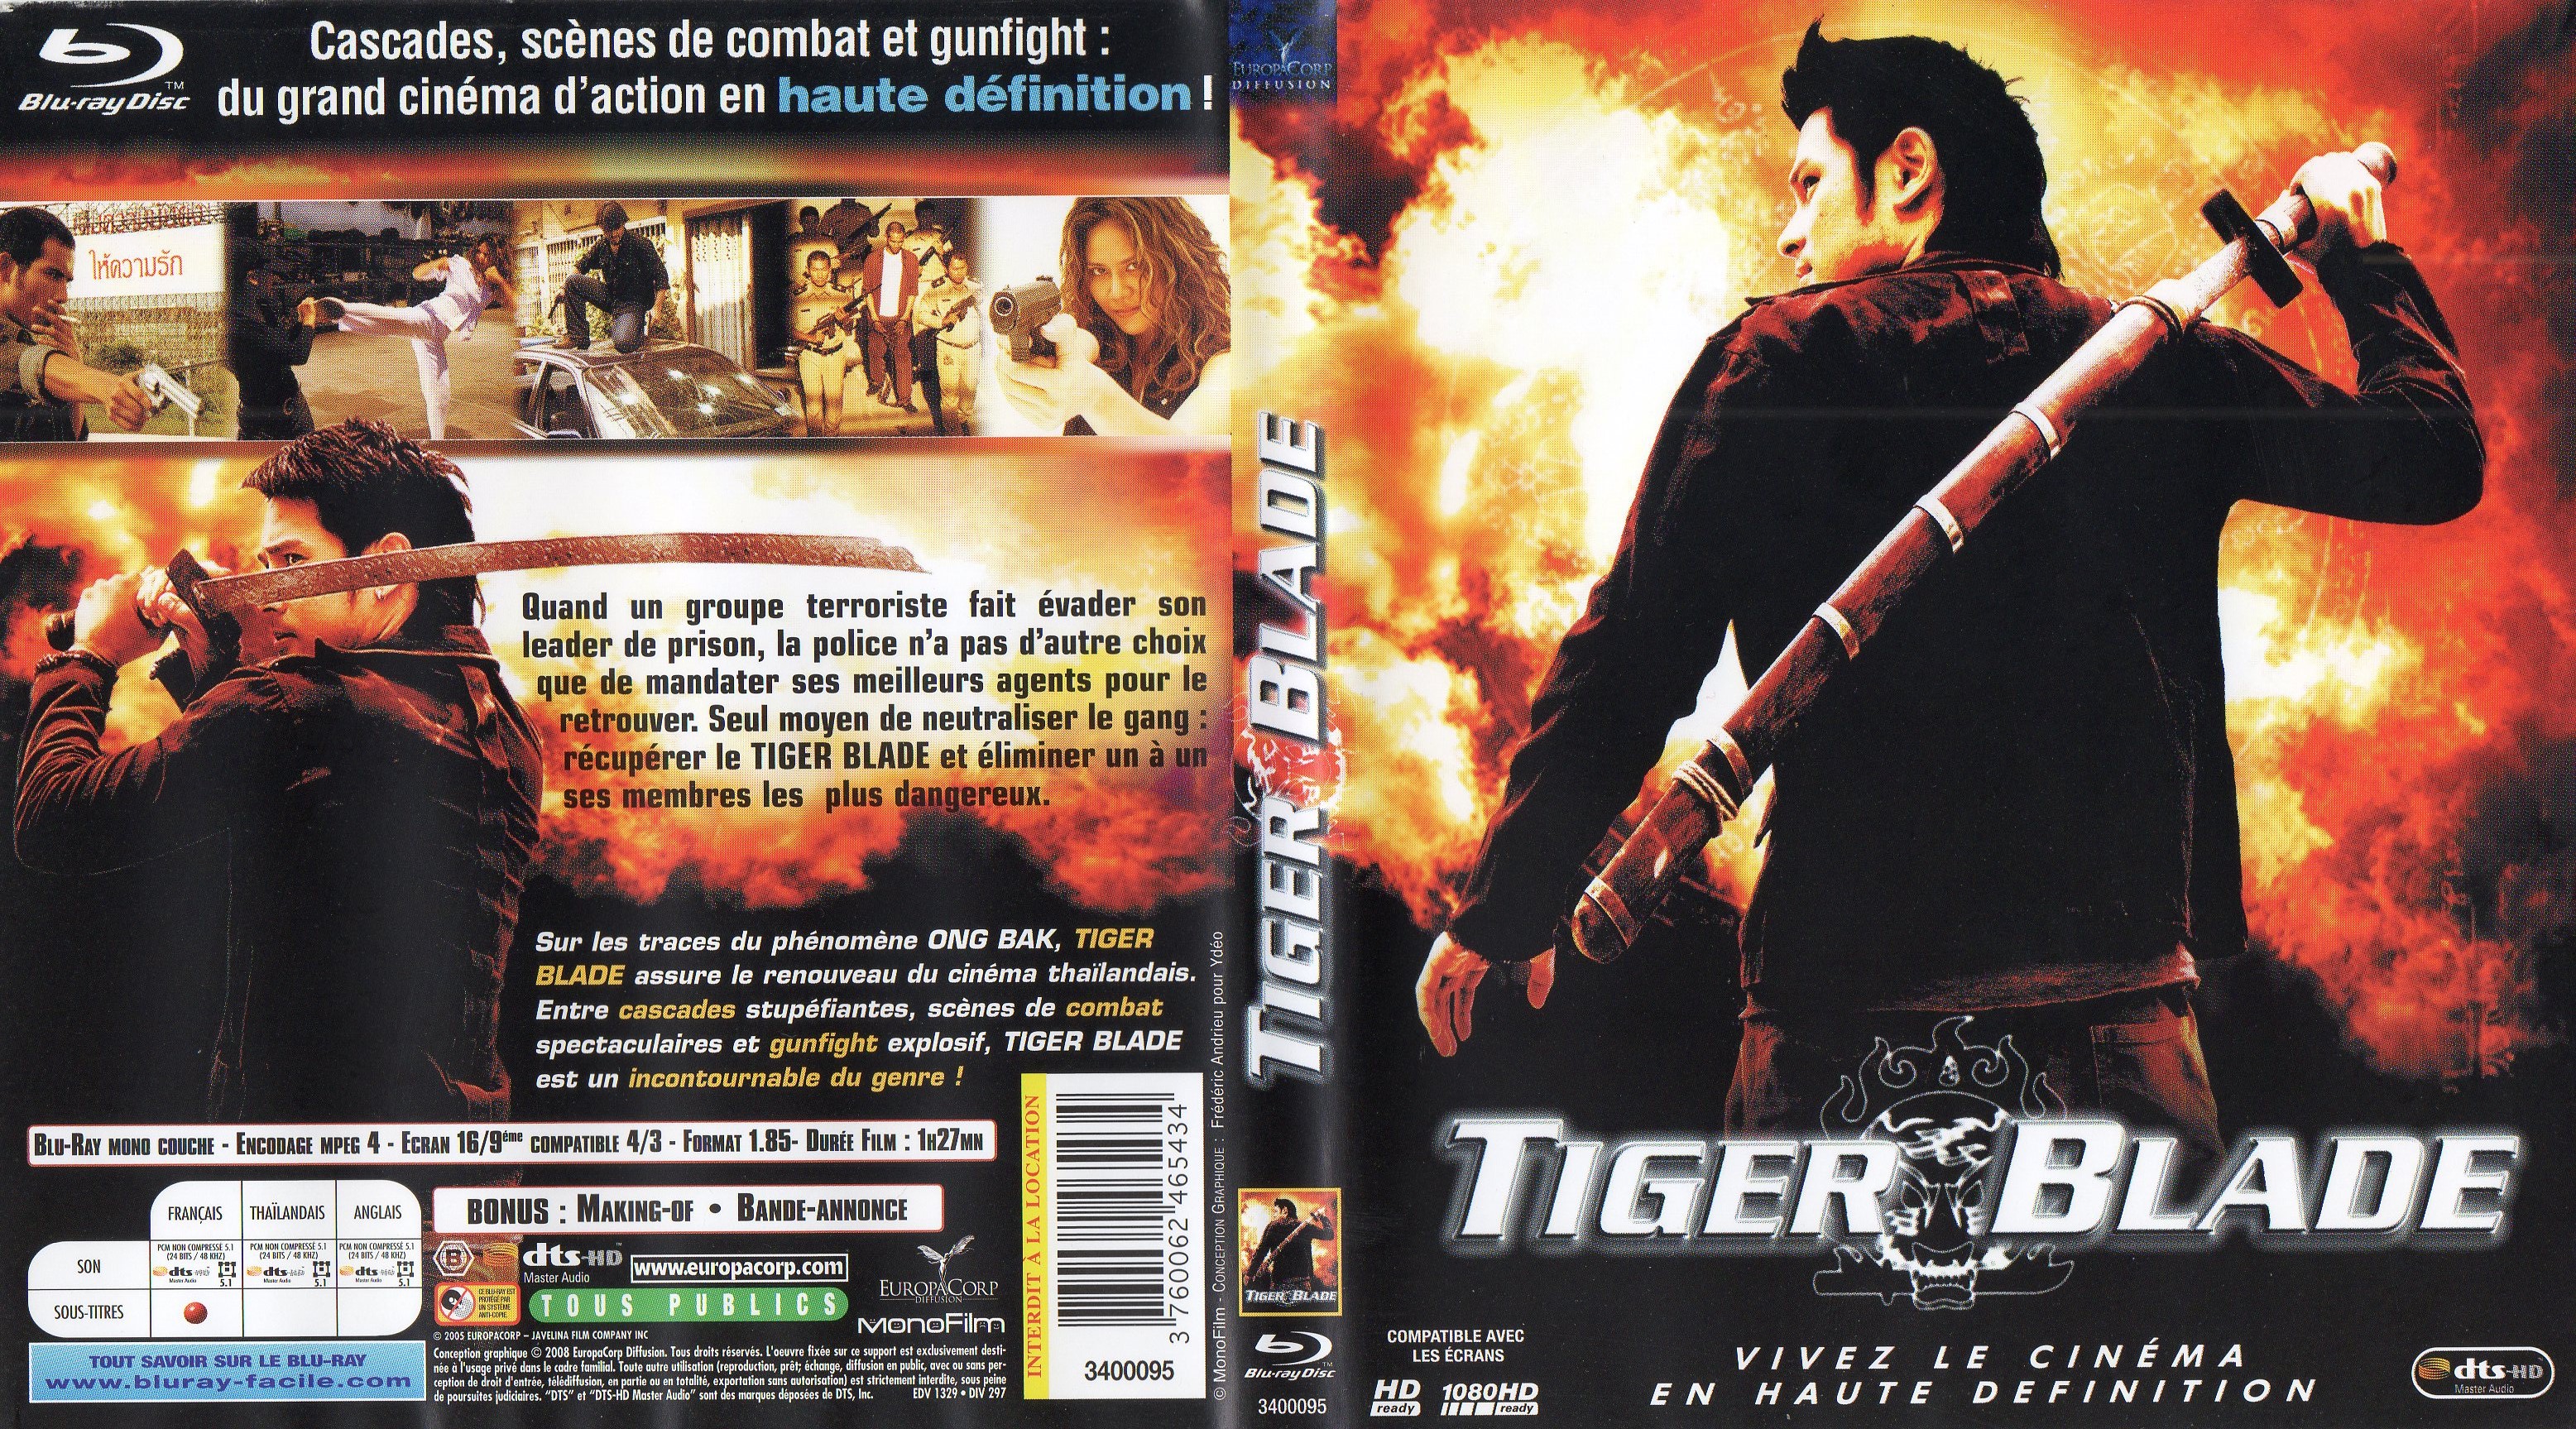 Jaquette DVD Tiger blade (BLU-RAY)